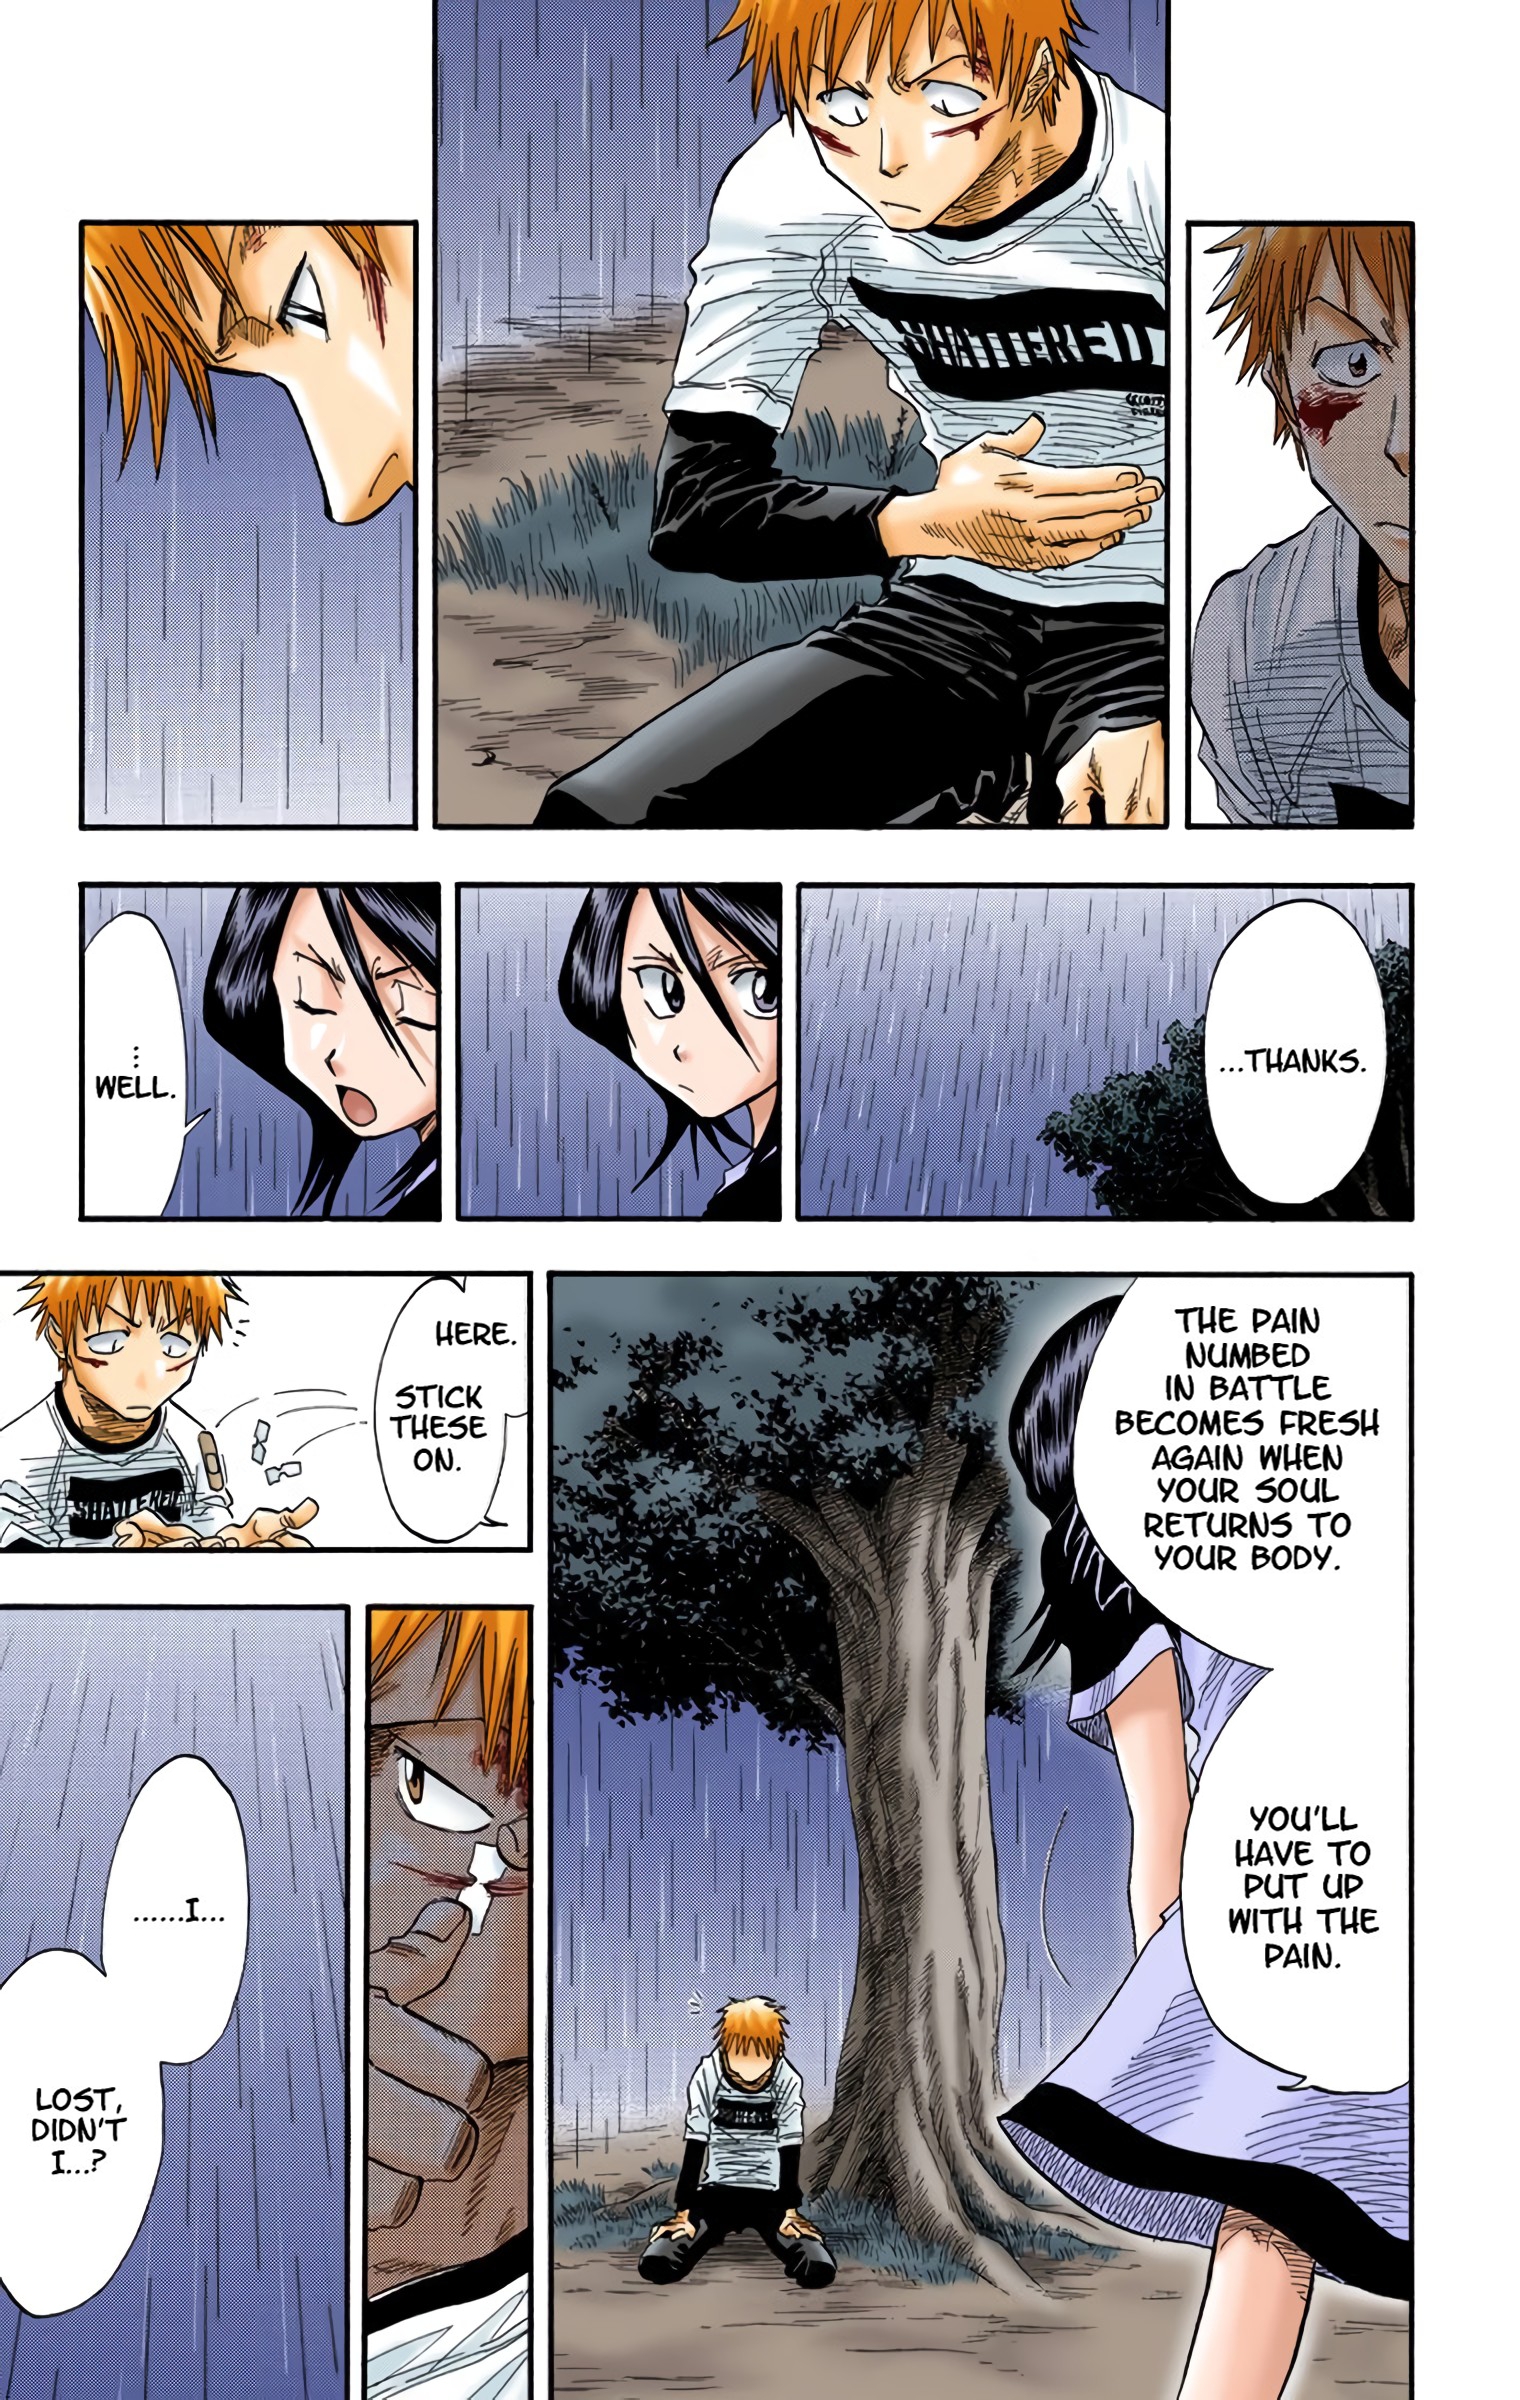 Bleach - Digital Colored Comics Vol.3 Chapter 25: 6/17 Op. 9 A Fighting Boy 2 - Picture 2